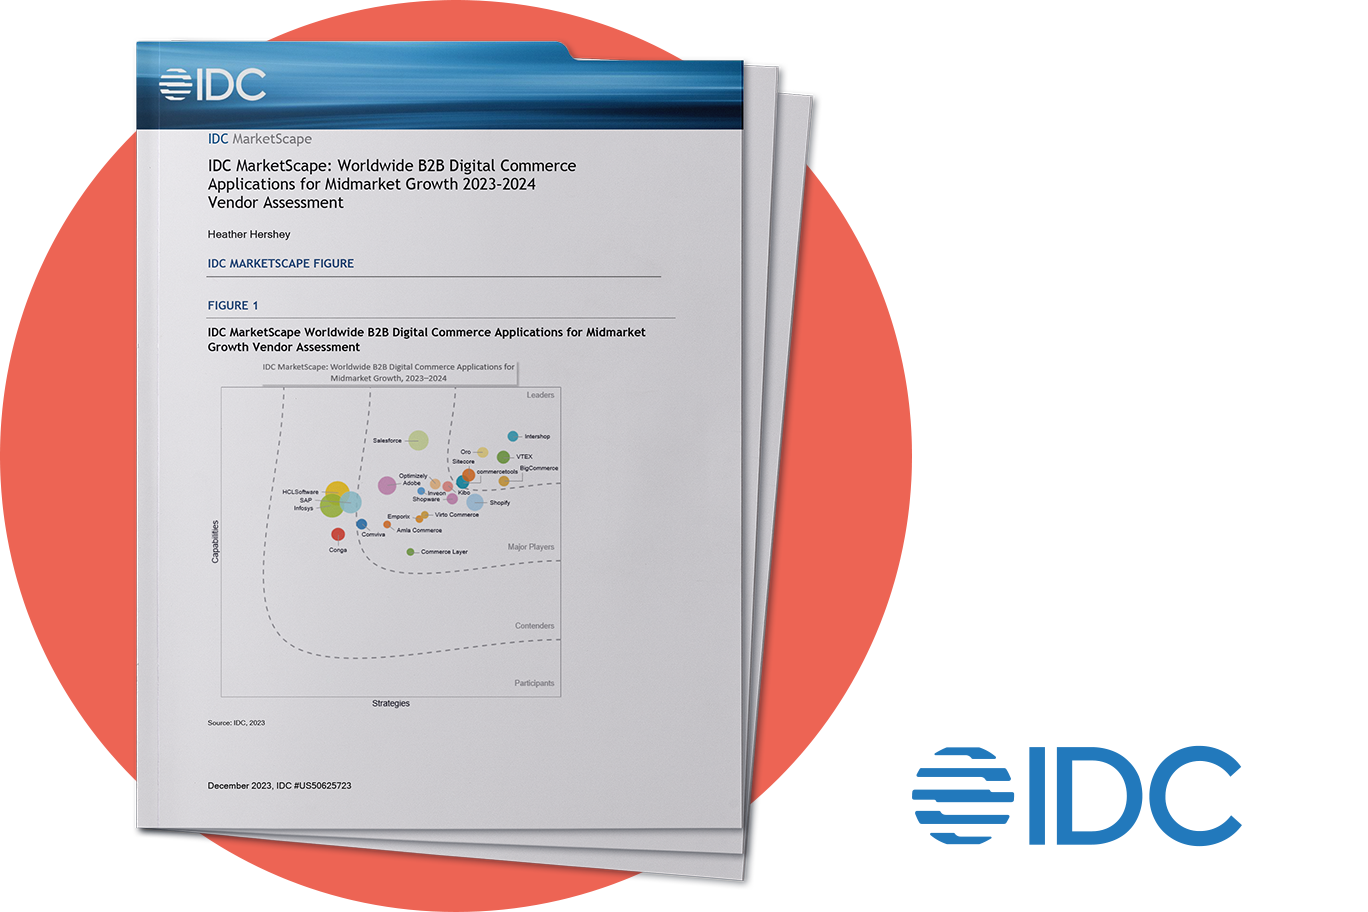 Intershop named a Leader in IDC MarketScape